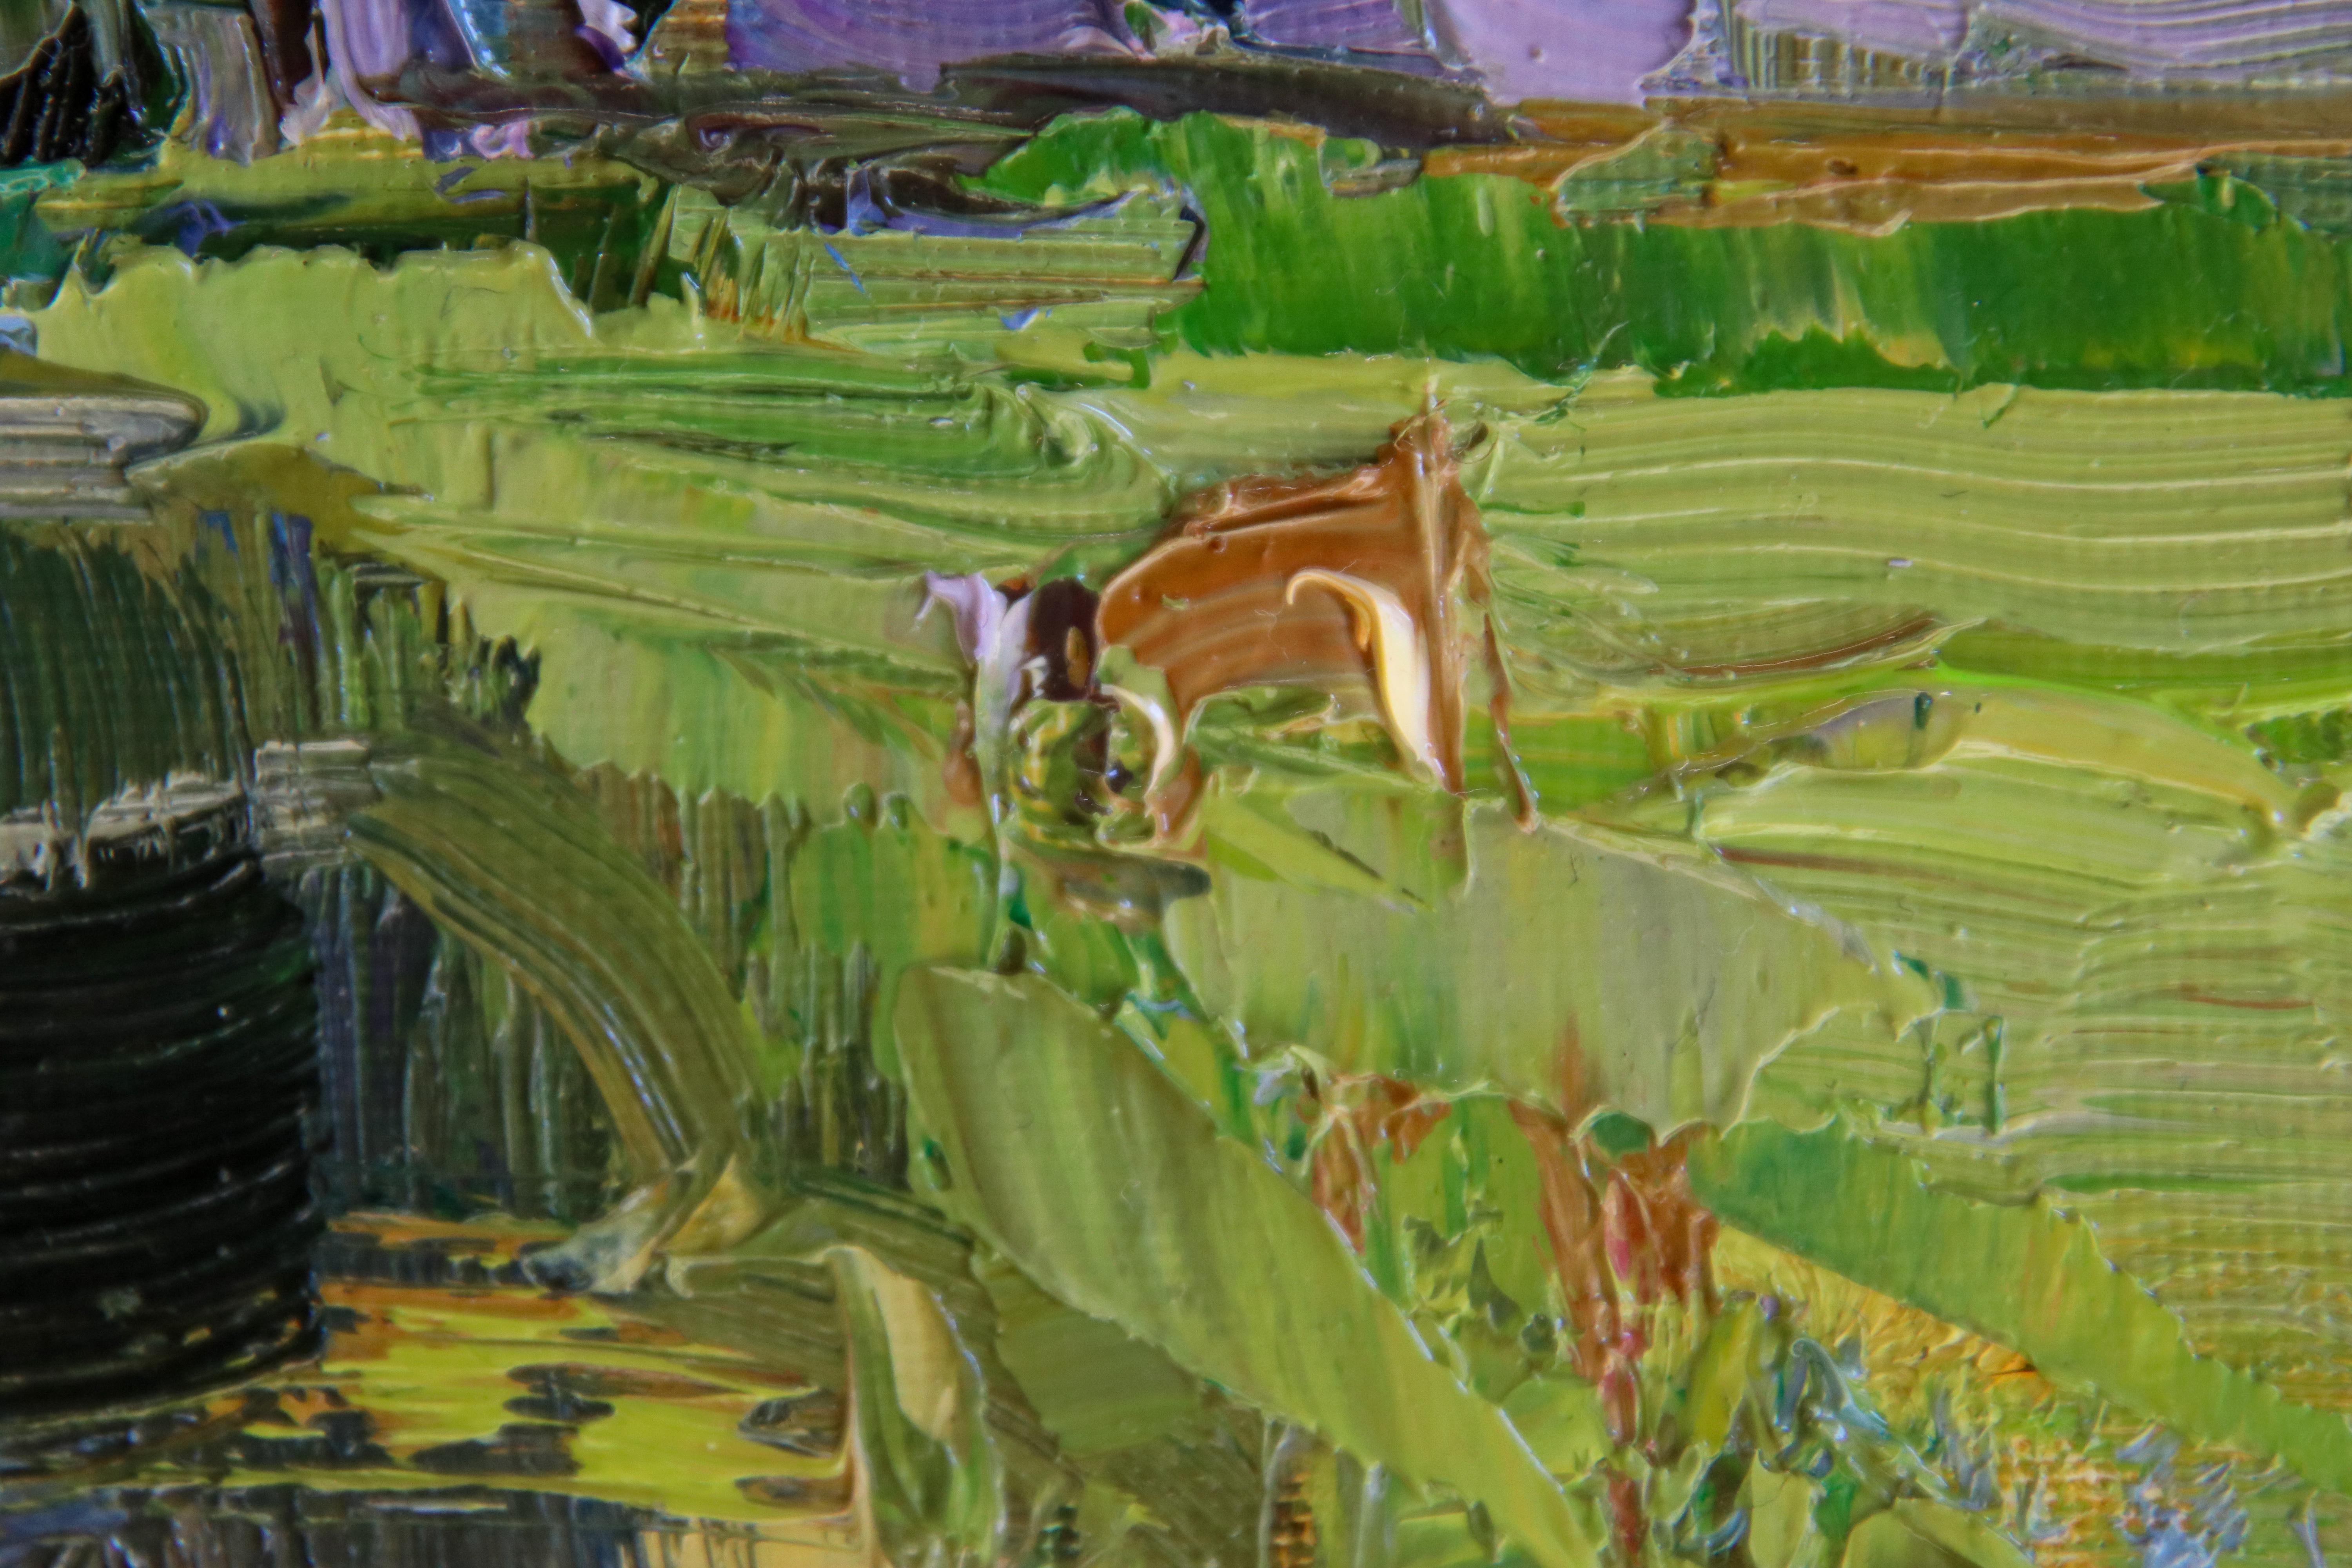 Dutch Landscape with Cows, Water and Trees - Contemporary Art by Roos Schuring 2